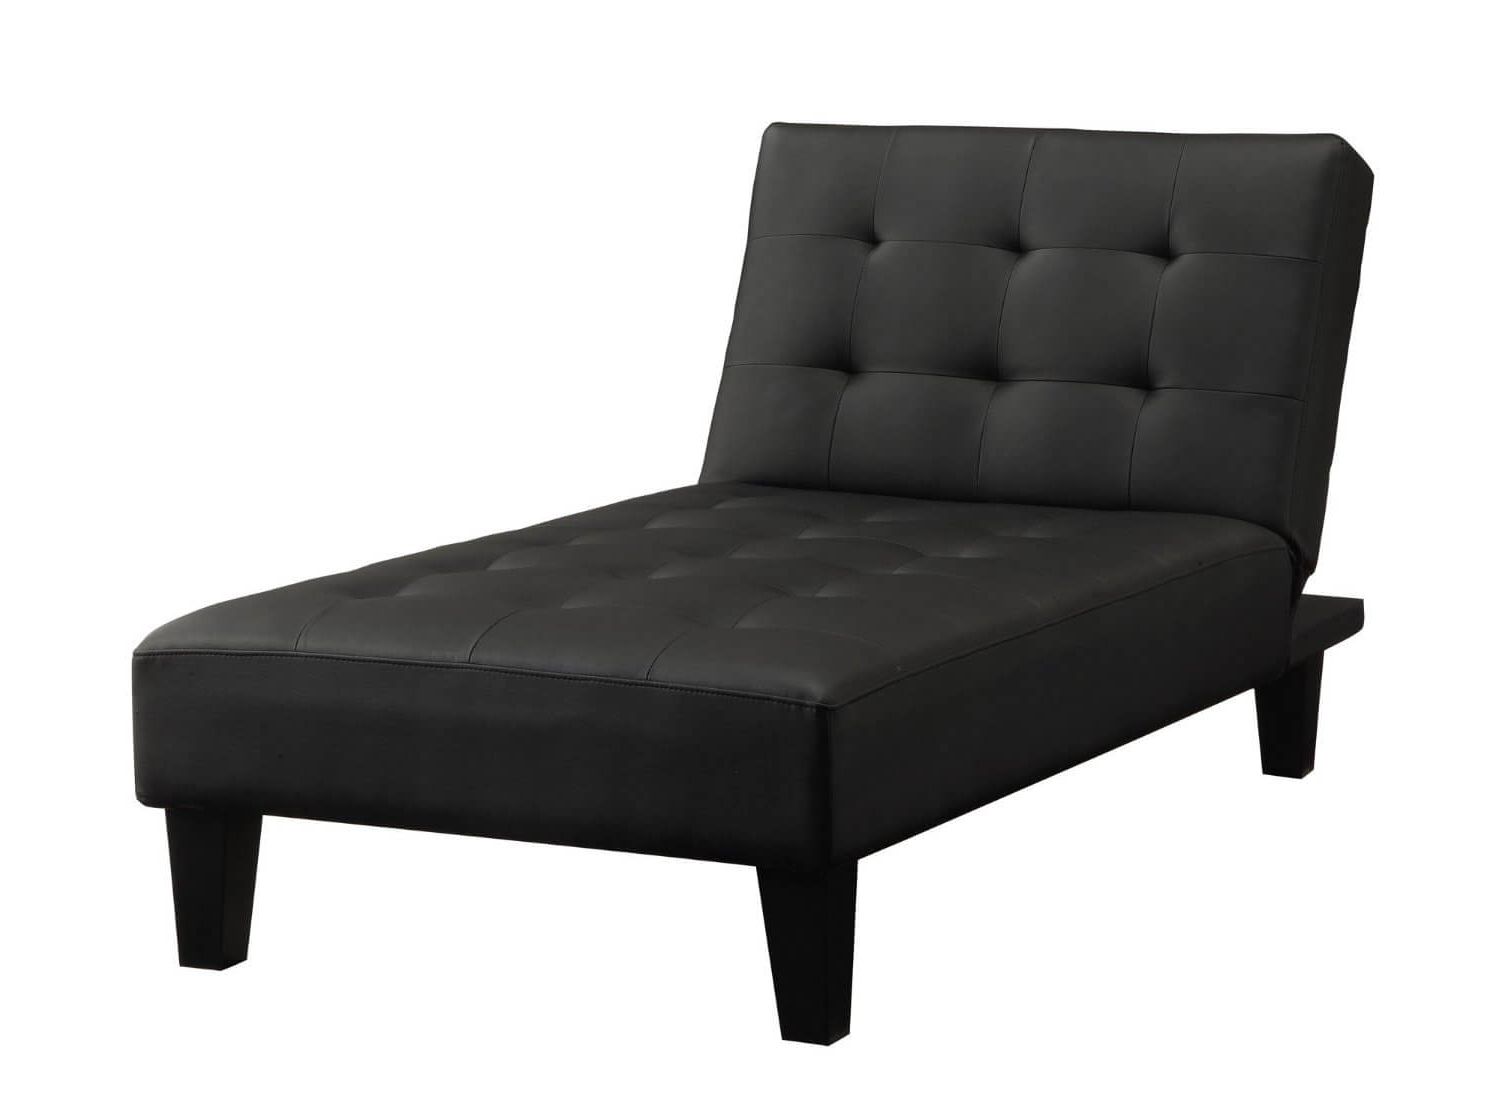 Top 20 Types Of Black Chaise Lounges (buying Guide) – Throughout 2017 Black Chaise Lounges (View 4 of 15)